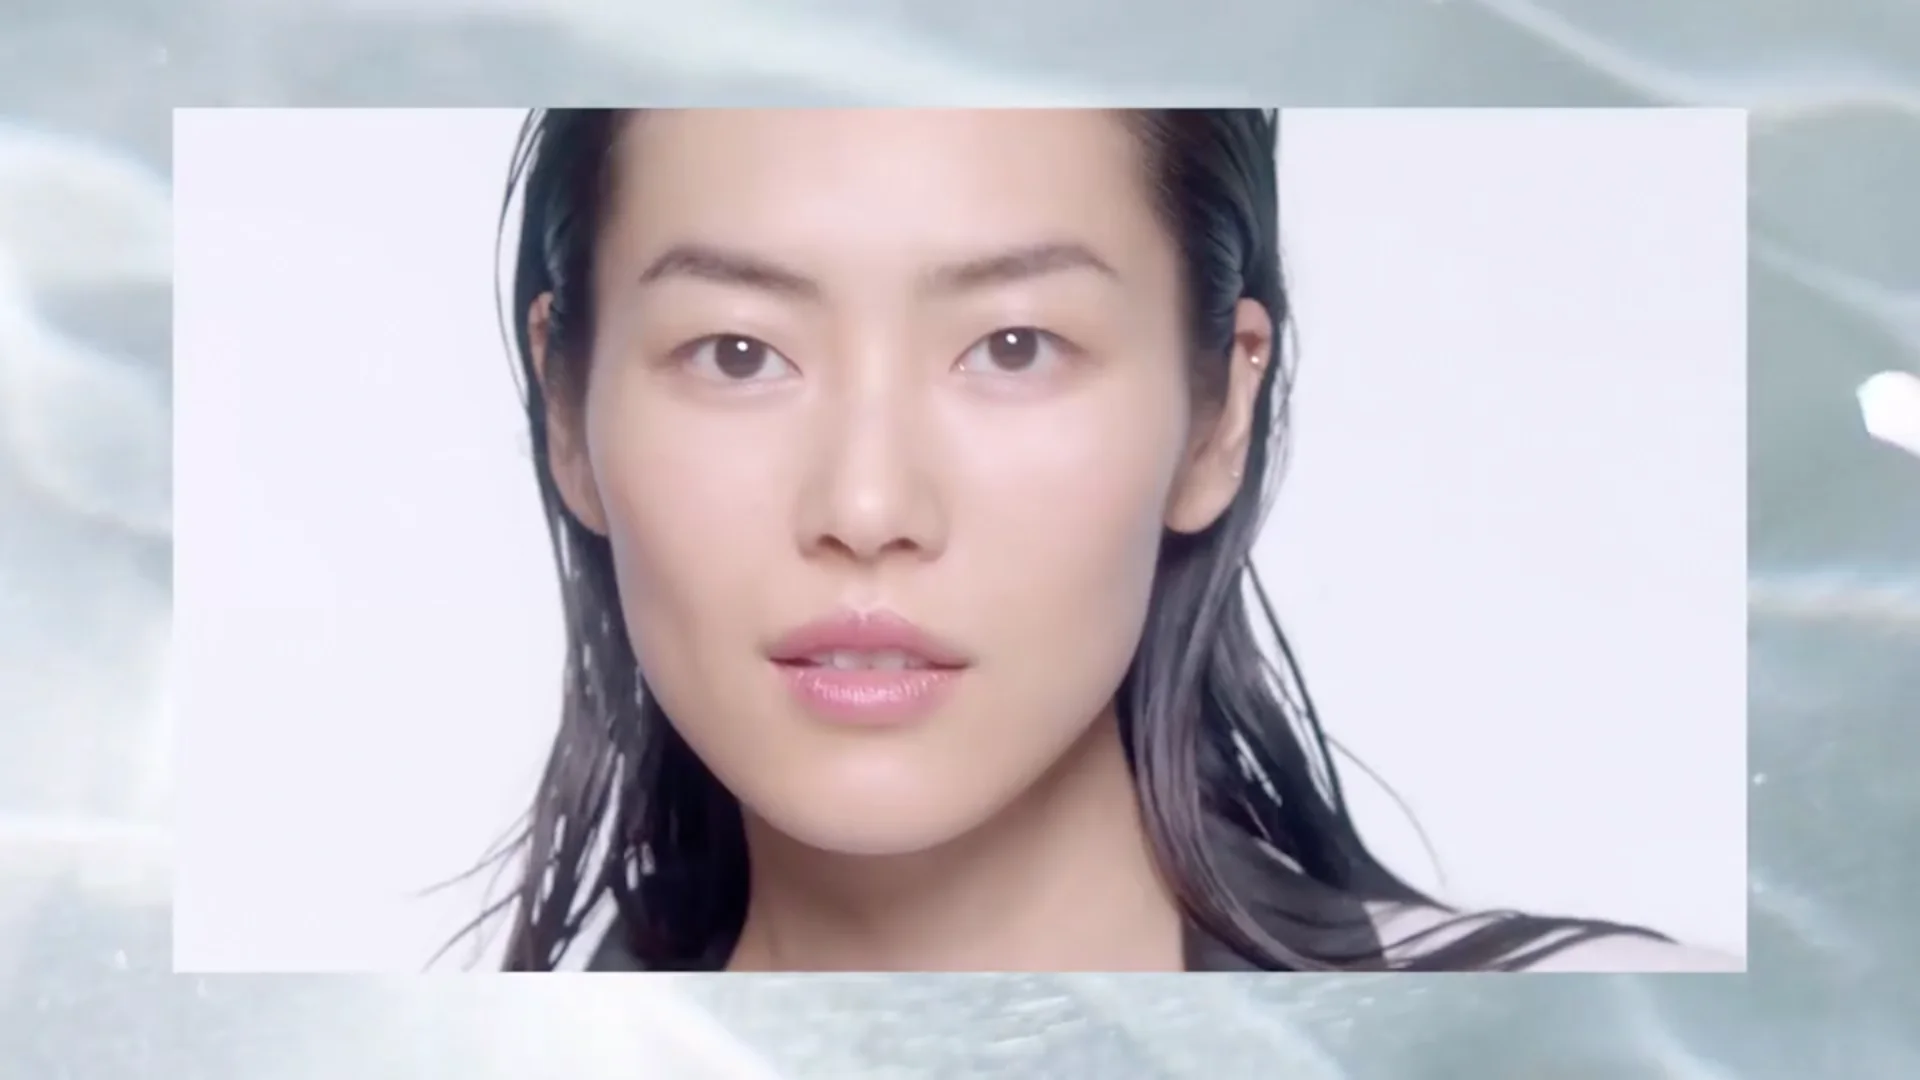 Chanel Hydra Beauty still of Asian model with wet hair staring into camera with graphic frame